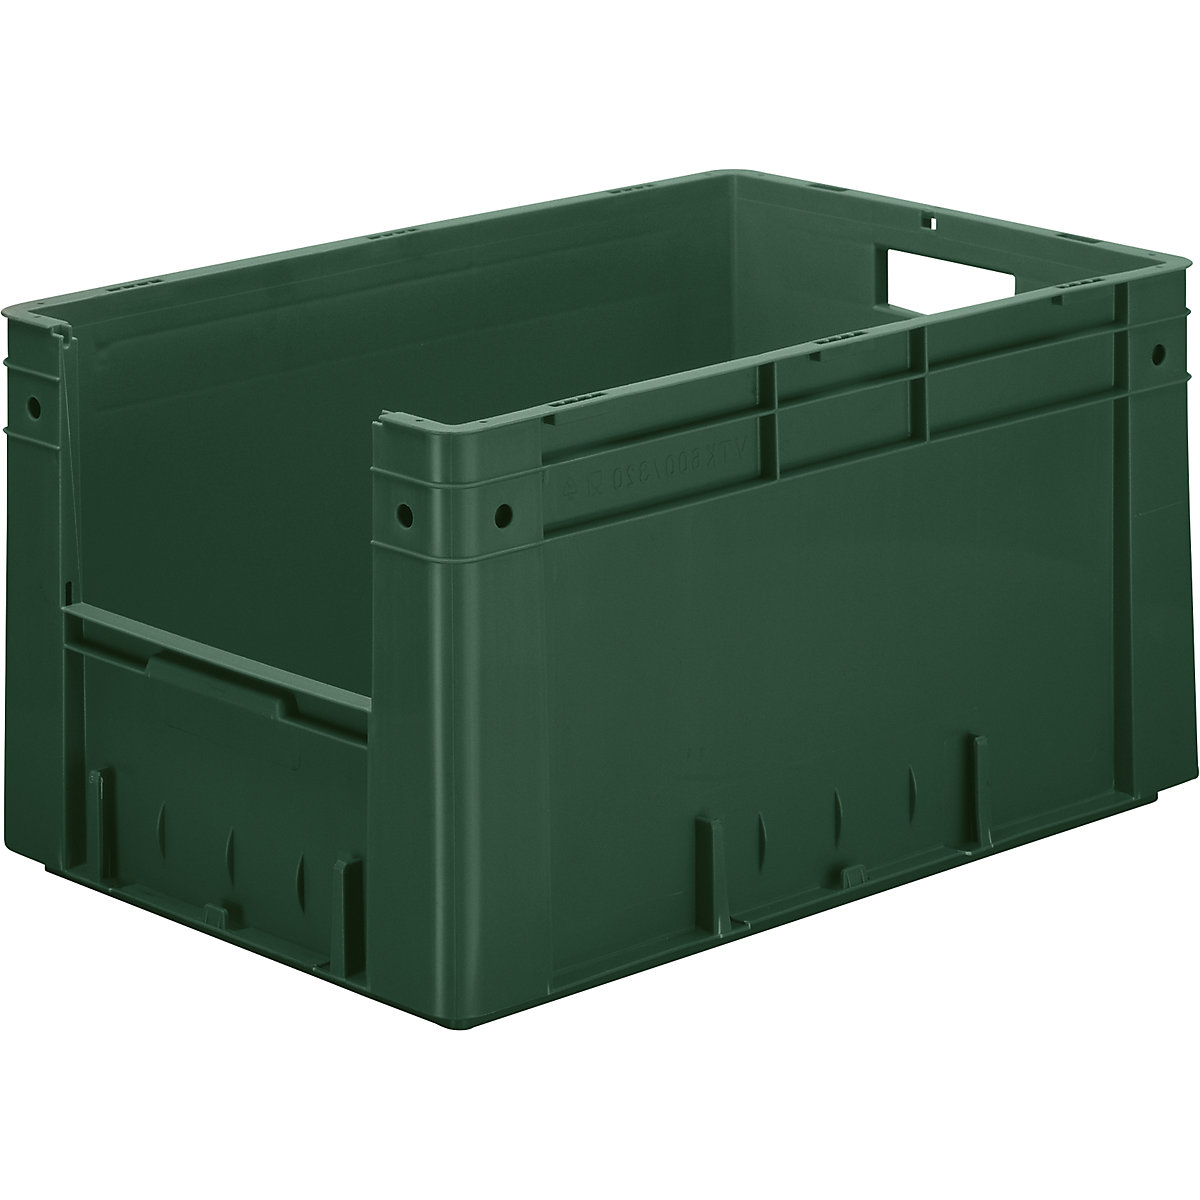 Euro stacking container, capacity 60 l, LxWxH 600 x 400 x 320 mm, pack of 2, green-5